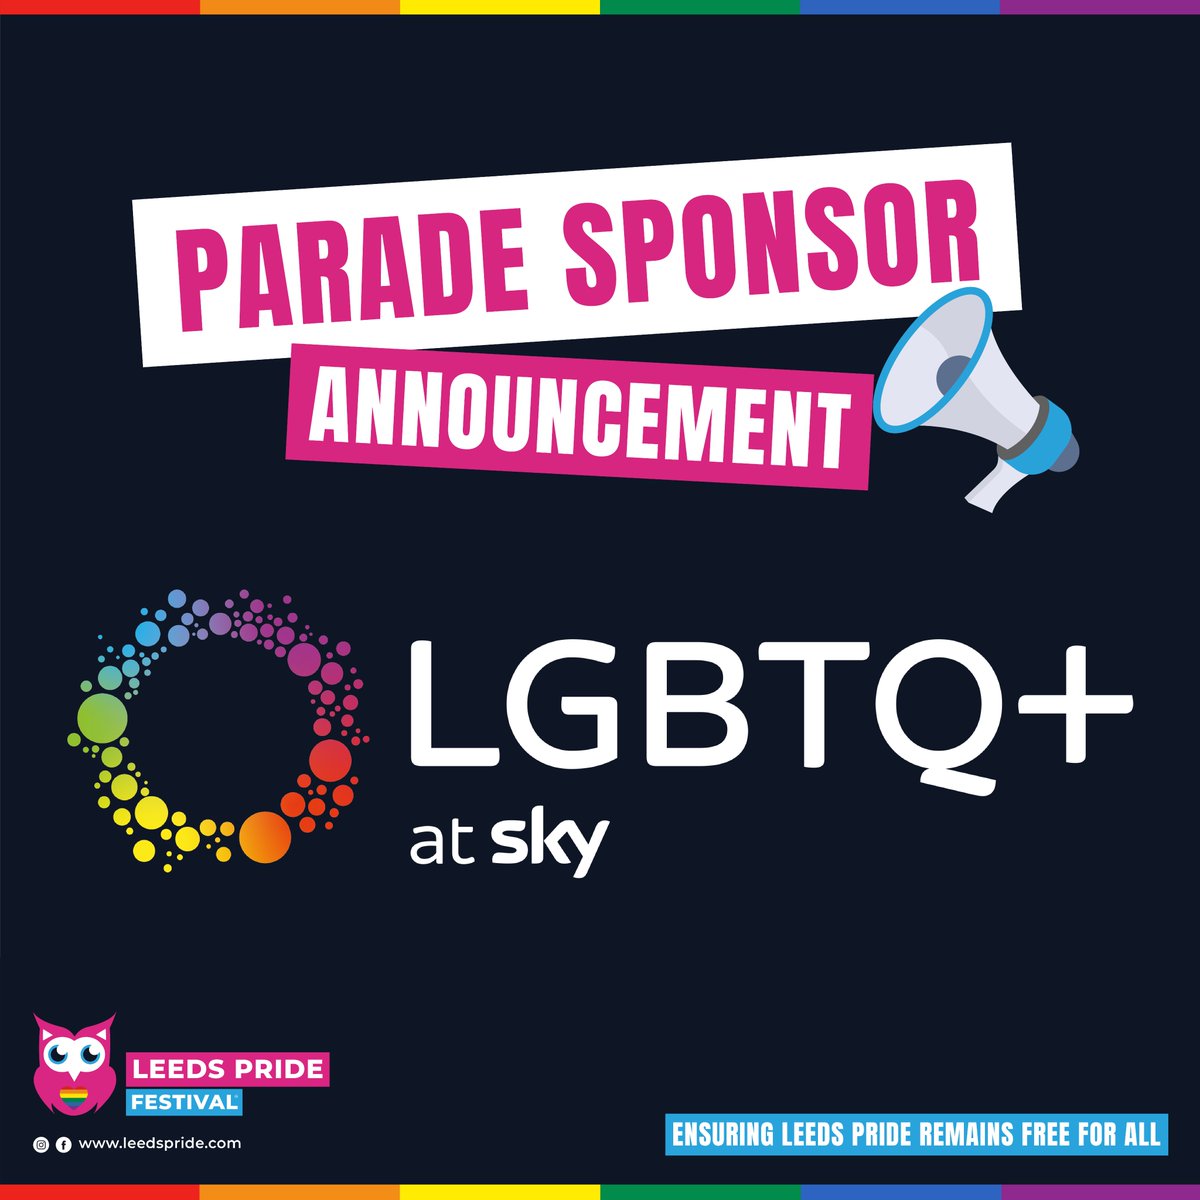 ⭐️Announcement⭐️ LGBTQ+ at Sky are delighted to be partnering with Leeds Pride this year. We’re incredibly proud to be sponsoring this event on behalf of our queer colleagues and allies based in Leeds, and can’t wait to celebrate together at what’s set to be an incredible event!